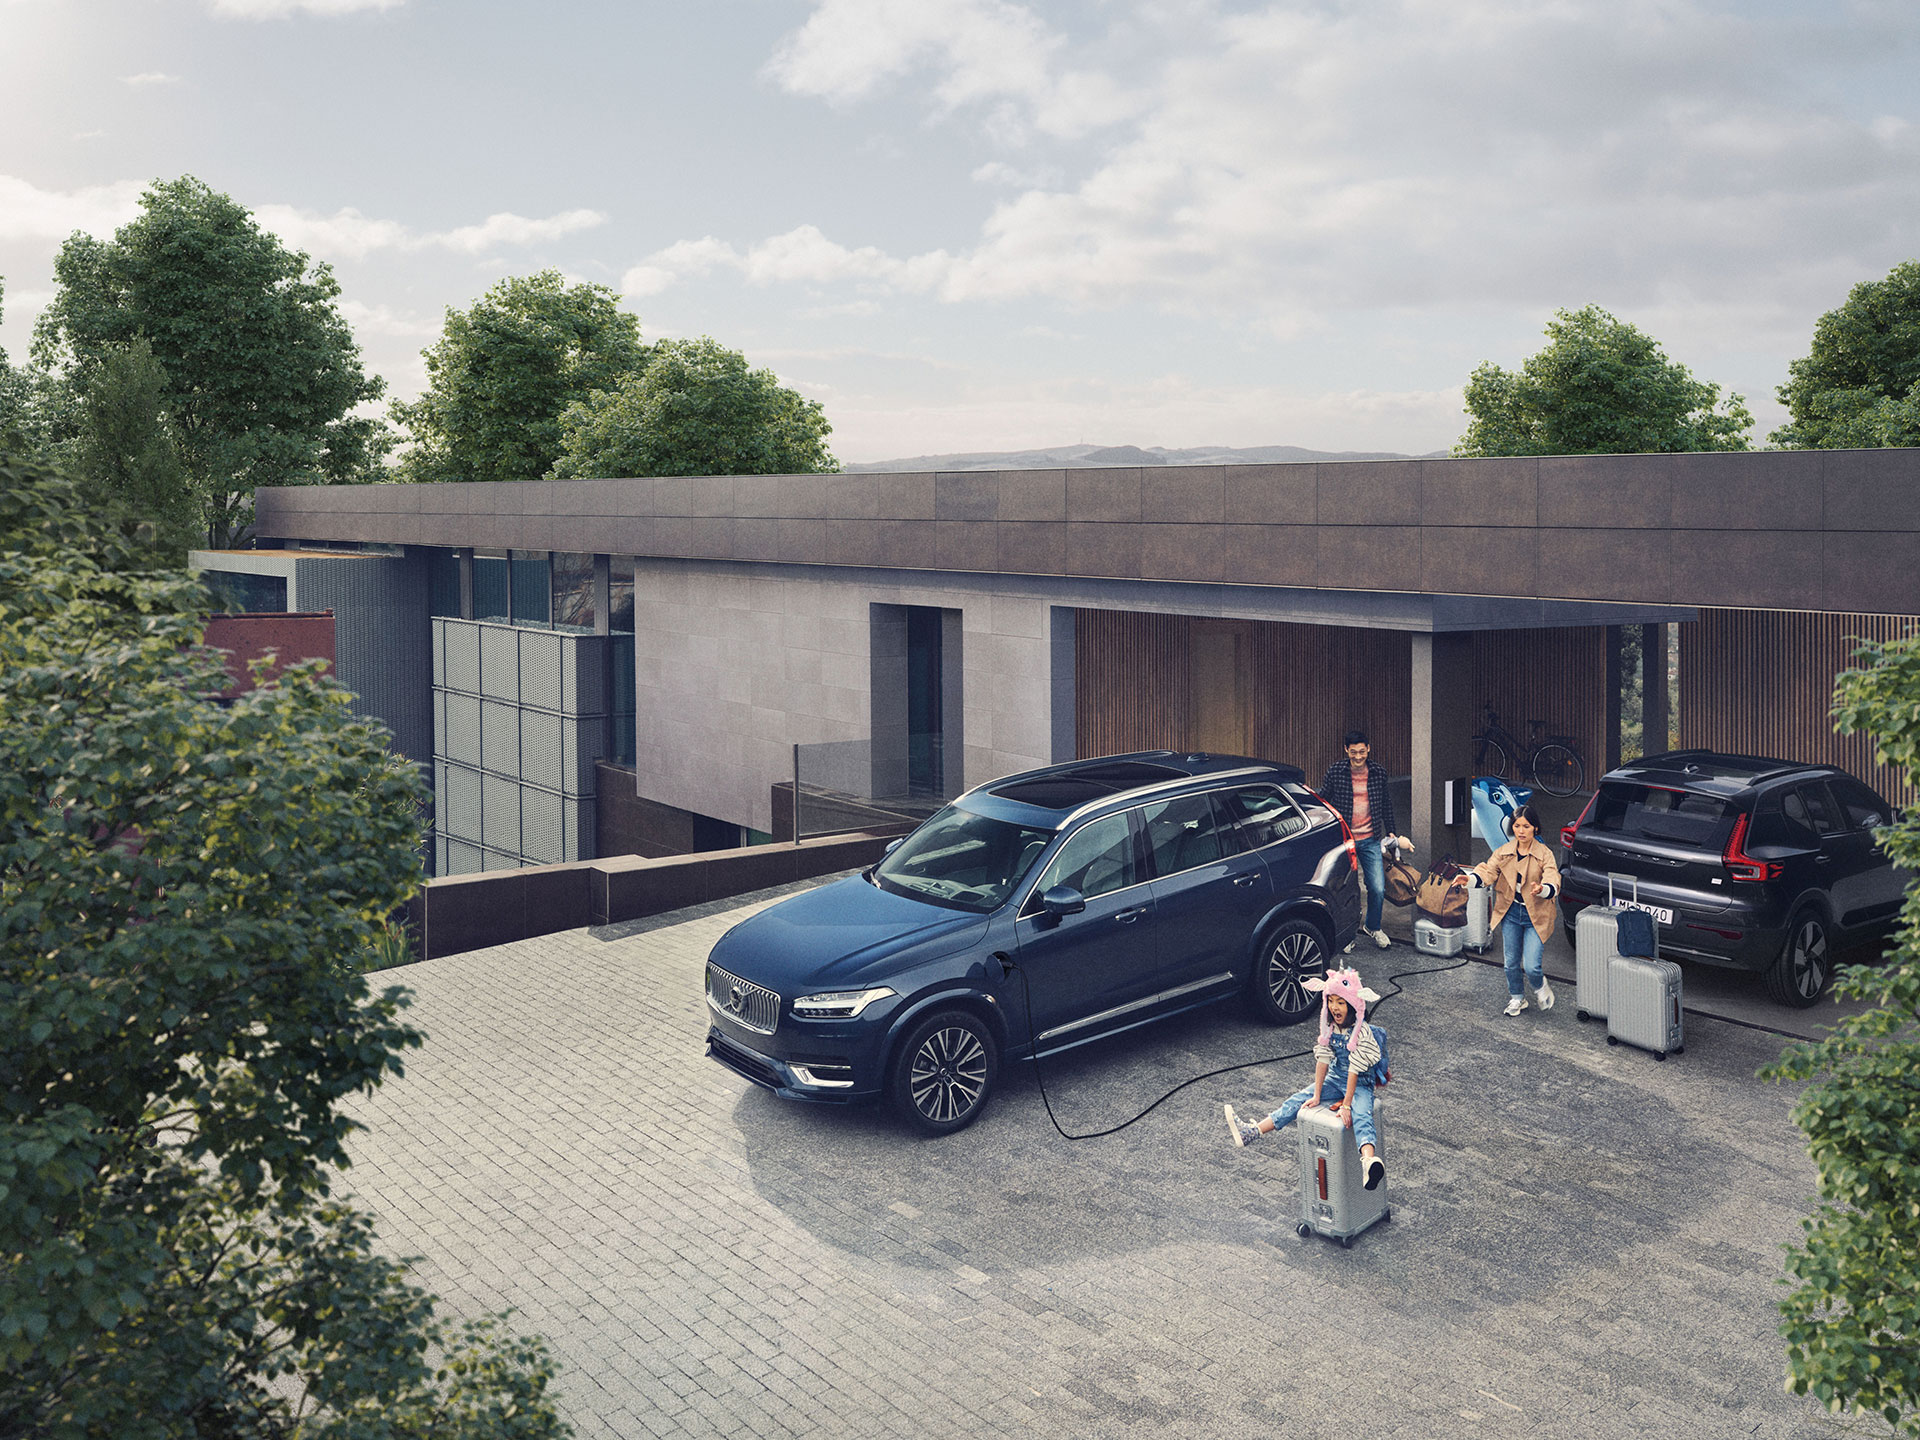 A Volvo XC60 with a family on the run